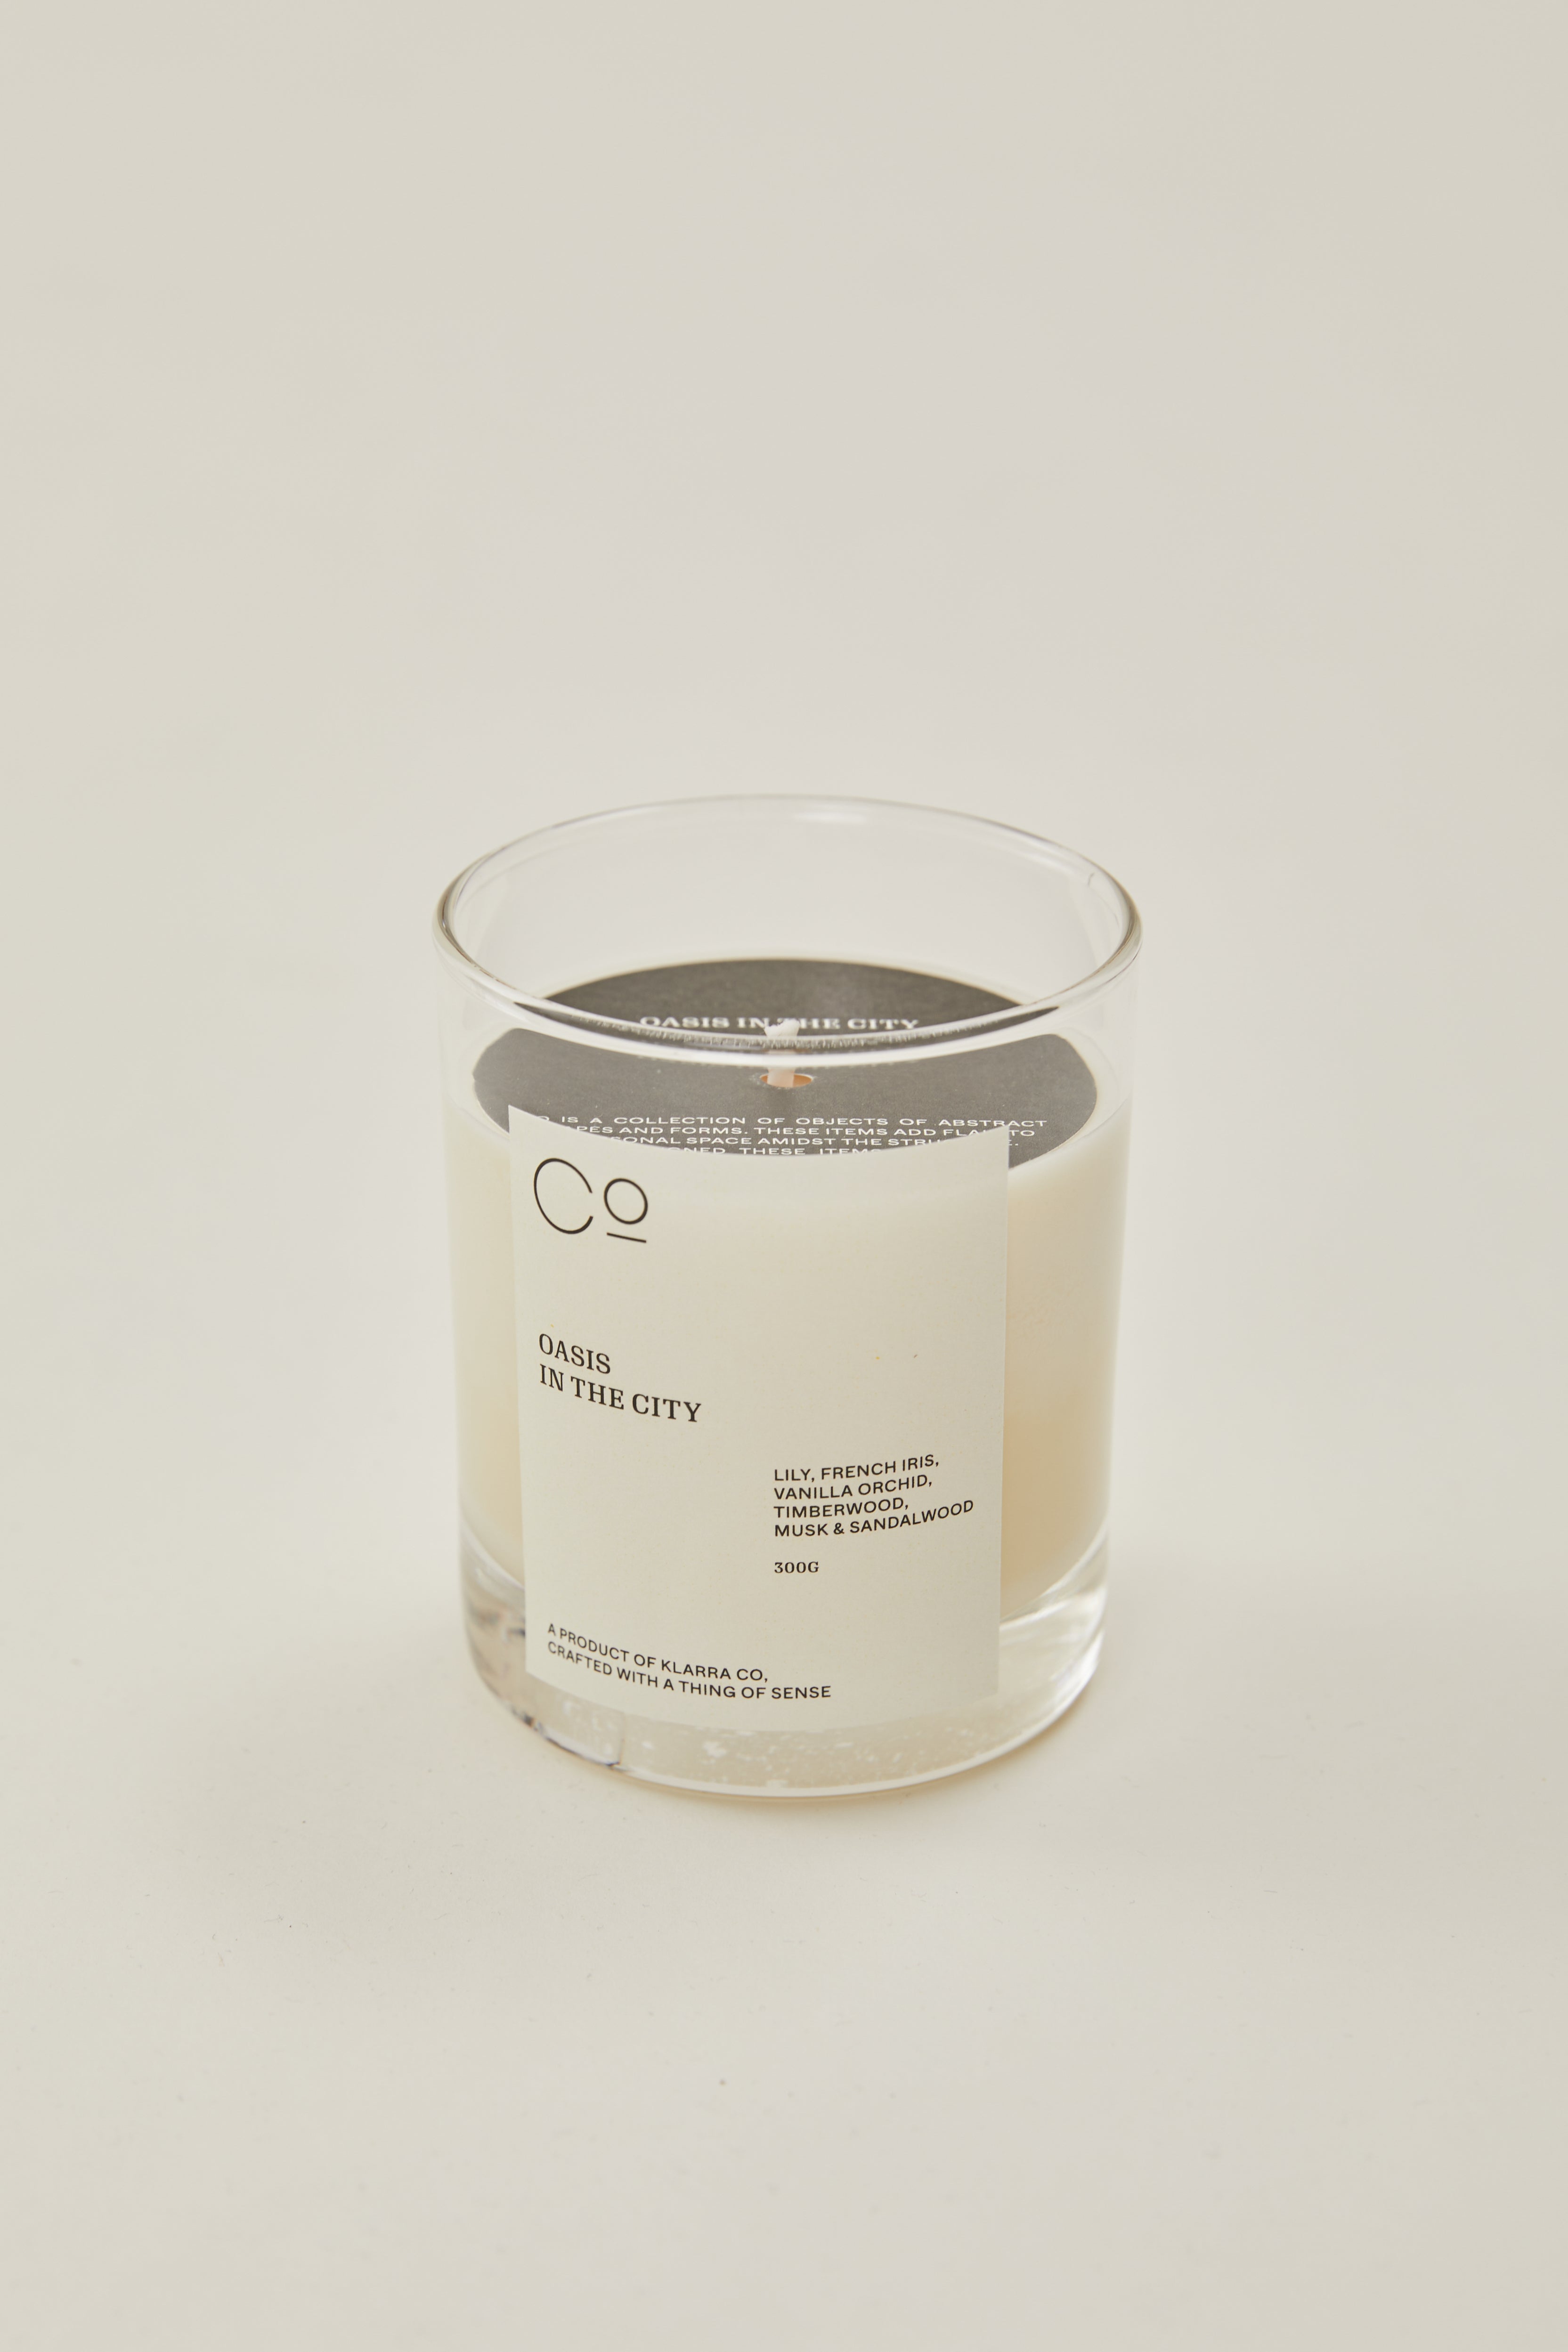 'Oasis in the City' Candle